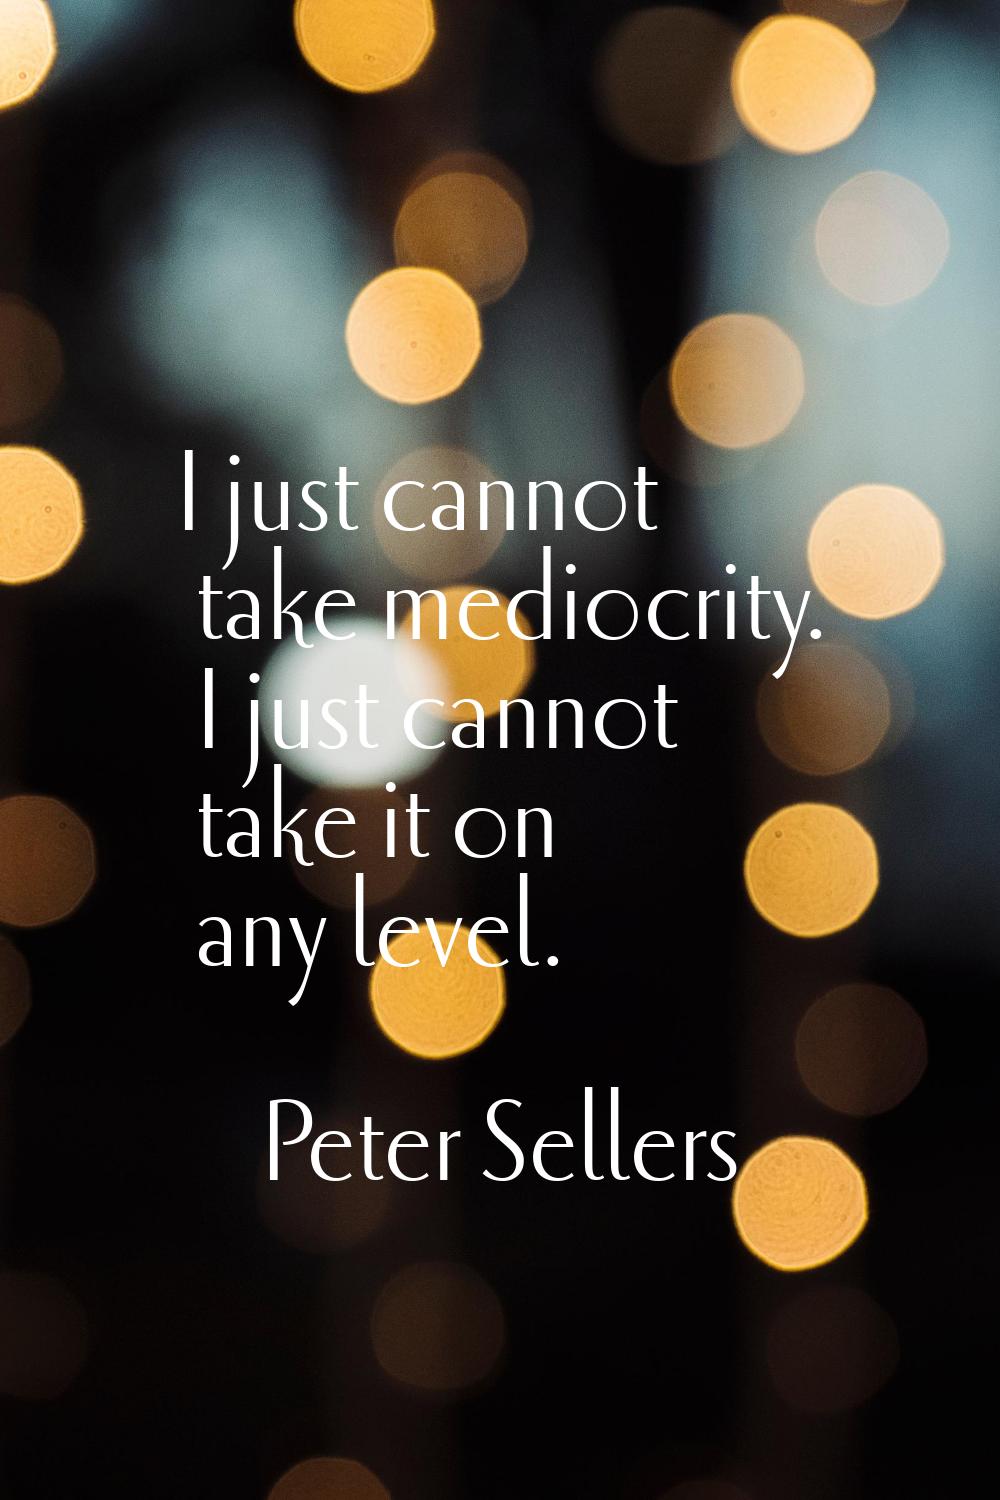 I just cannot take mediocrity. I just cannot take it on any level.